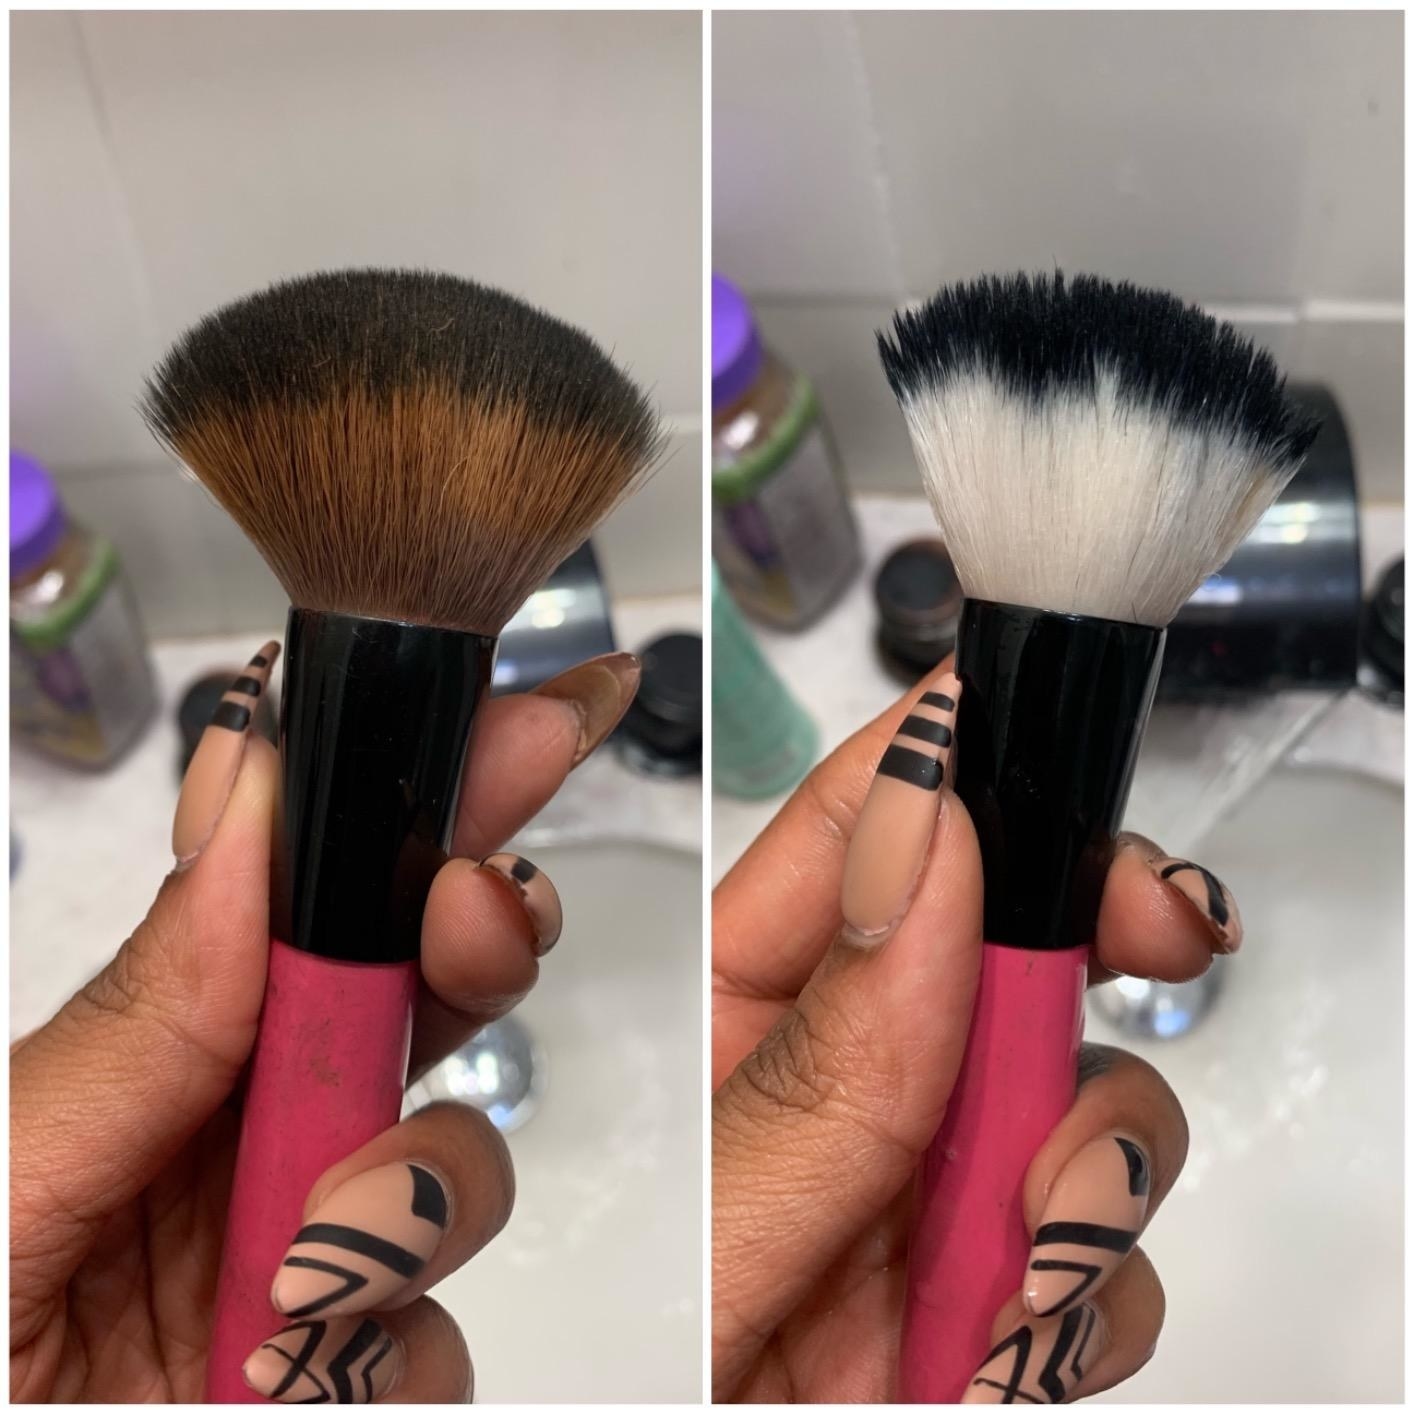 before and after reviewer images of a dirty brush becoming clean